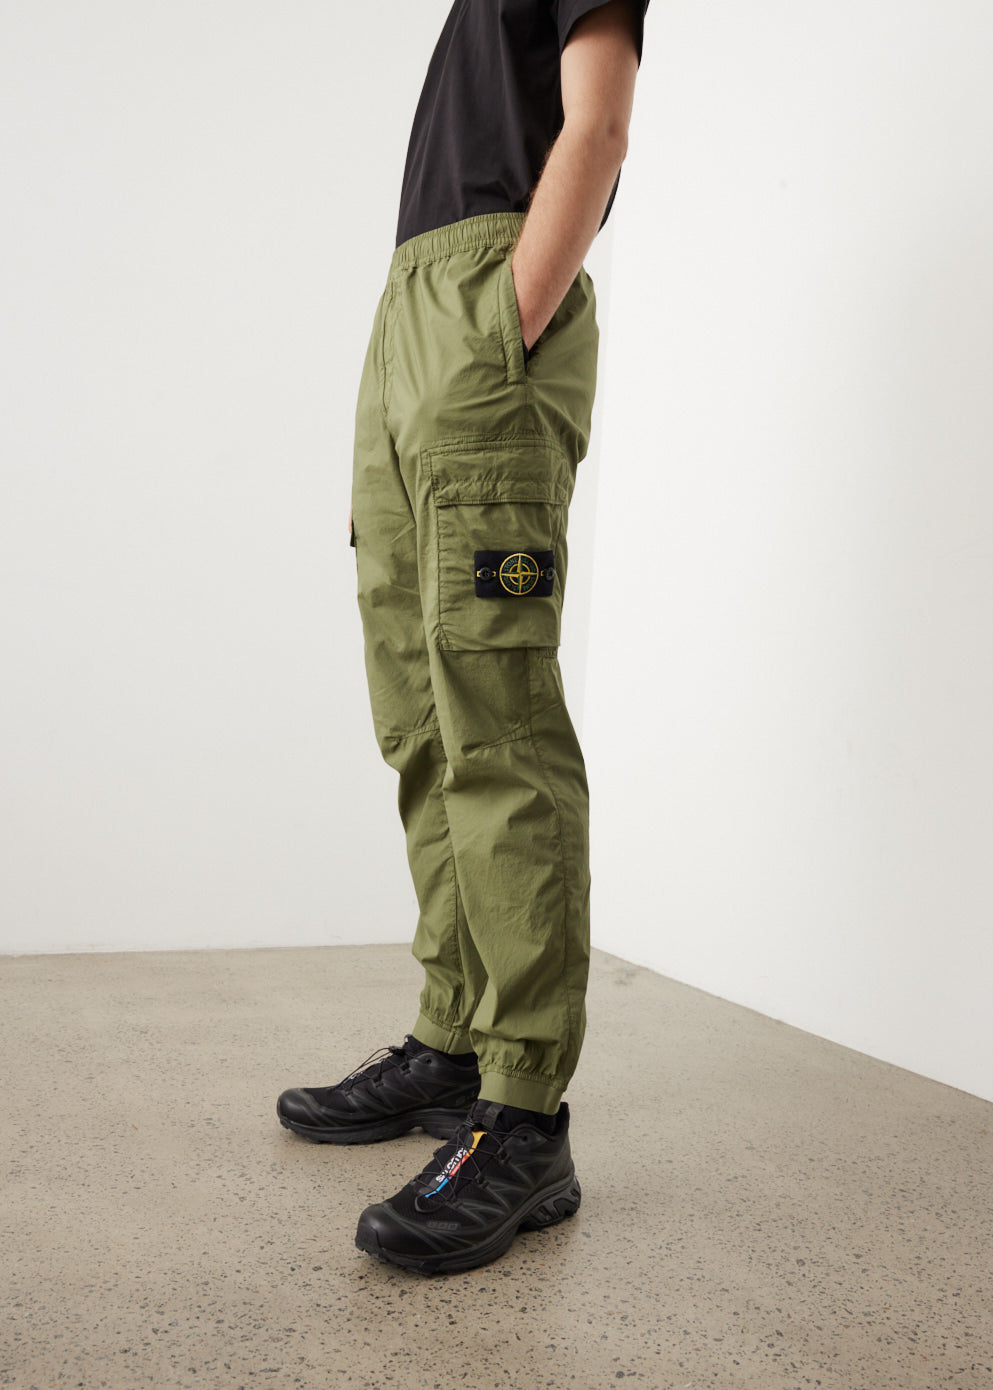 Green Tapered Cargo Pants by Stone Island on Sale